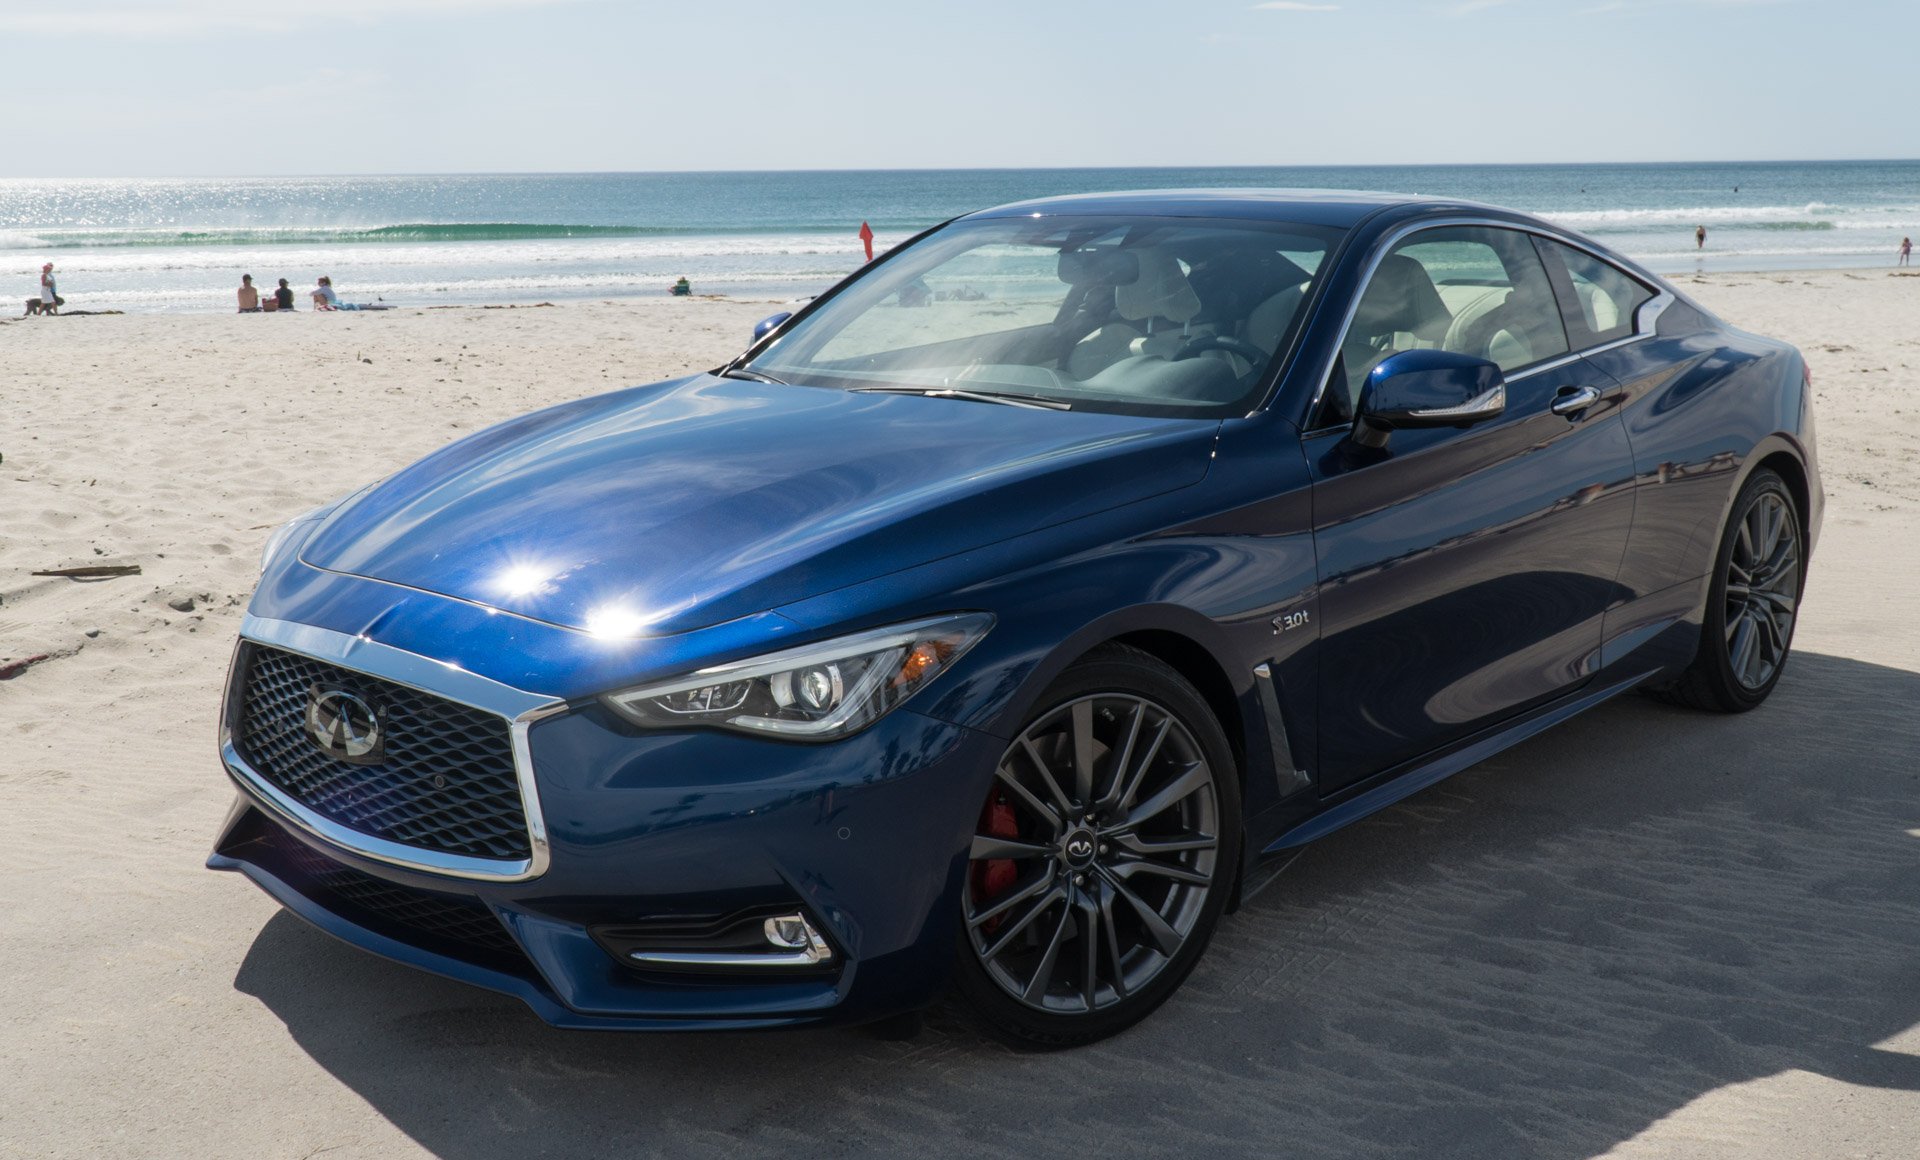 First Drive Review: 2017 Infiniti Q60 Red Sport 400